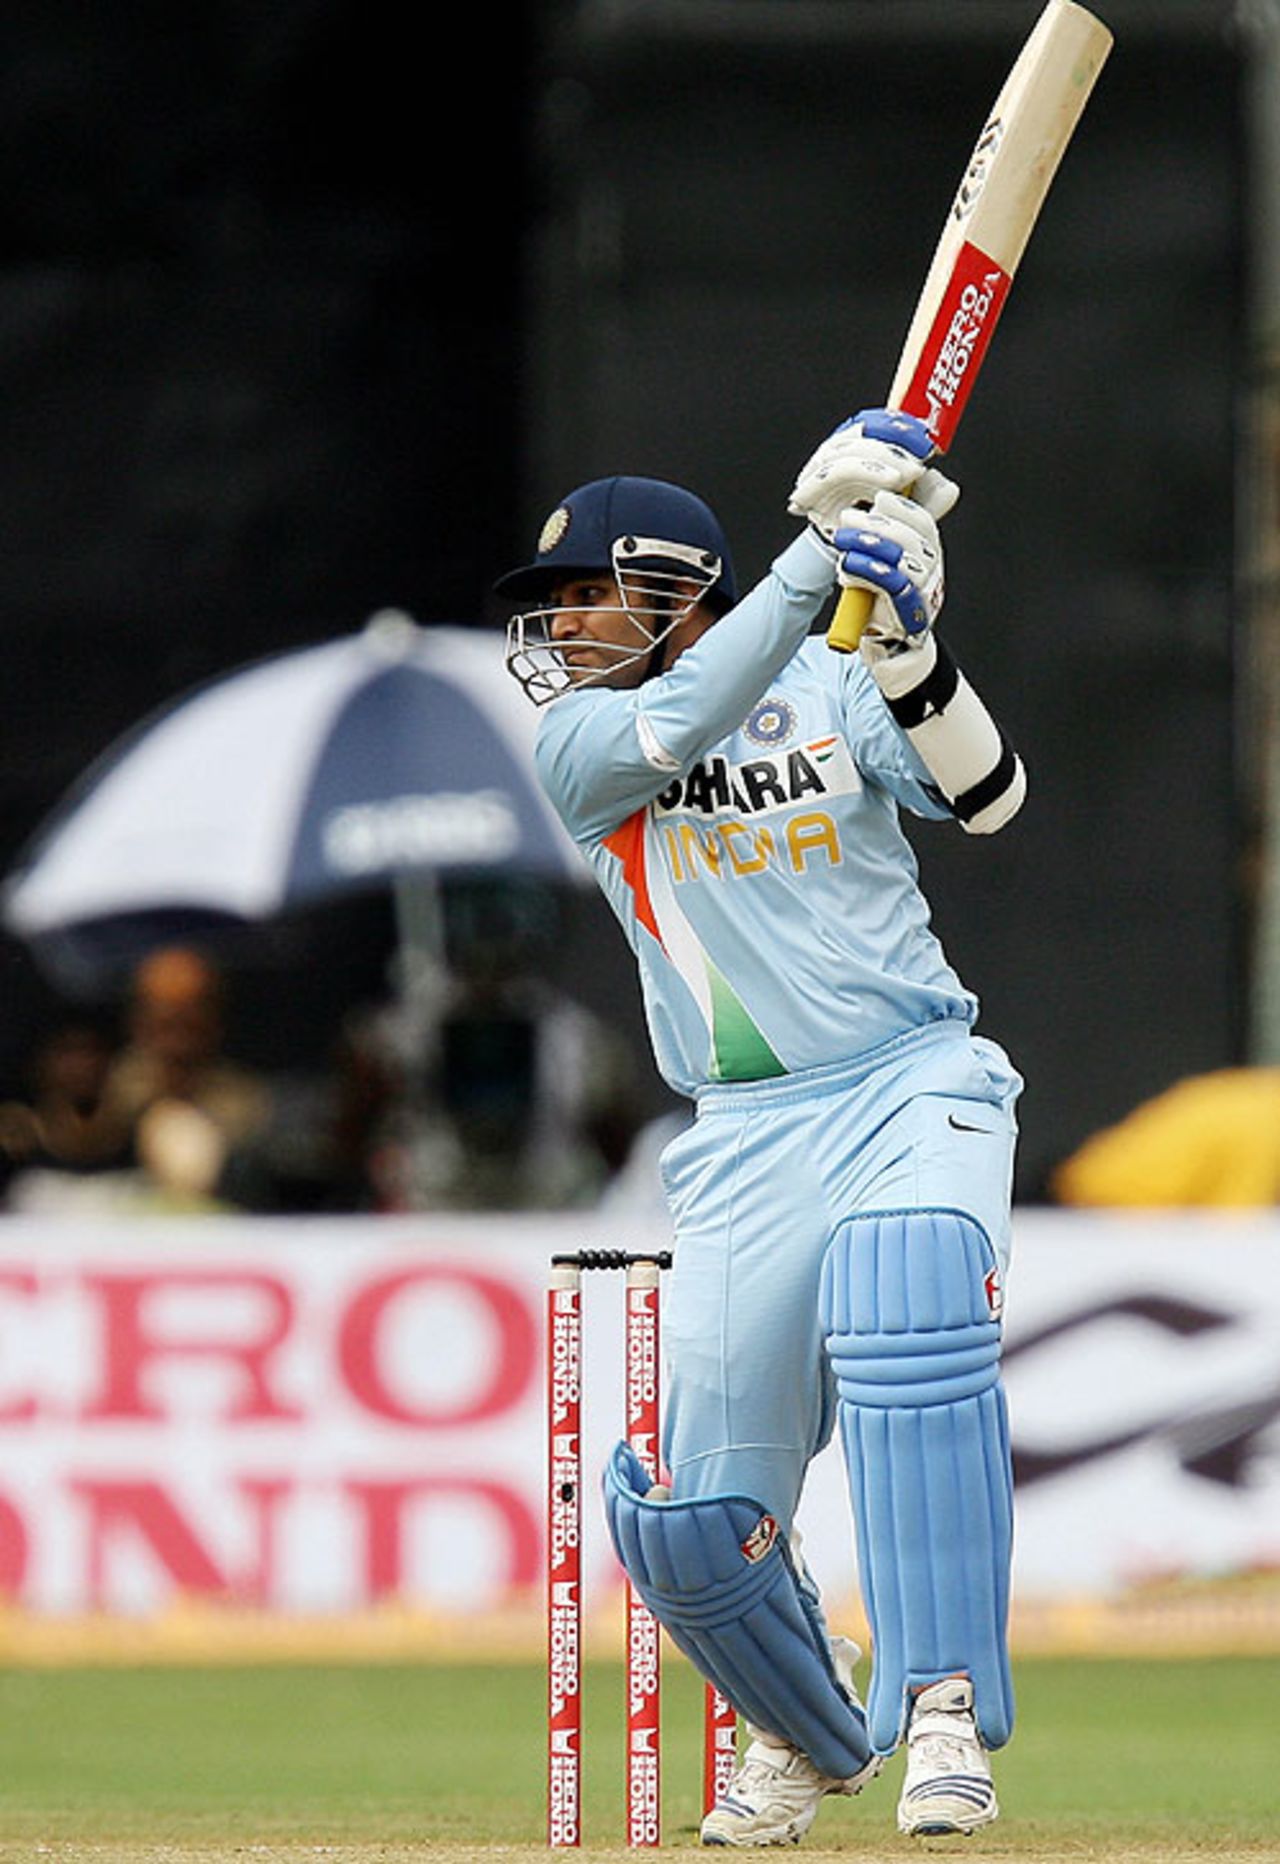 Virender Sehwag launches another boundary through the covers, India v England, 4th ODI, Bangalore, November 23, 2008